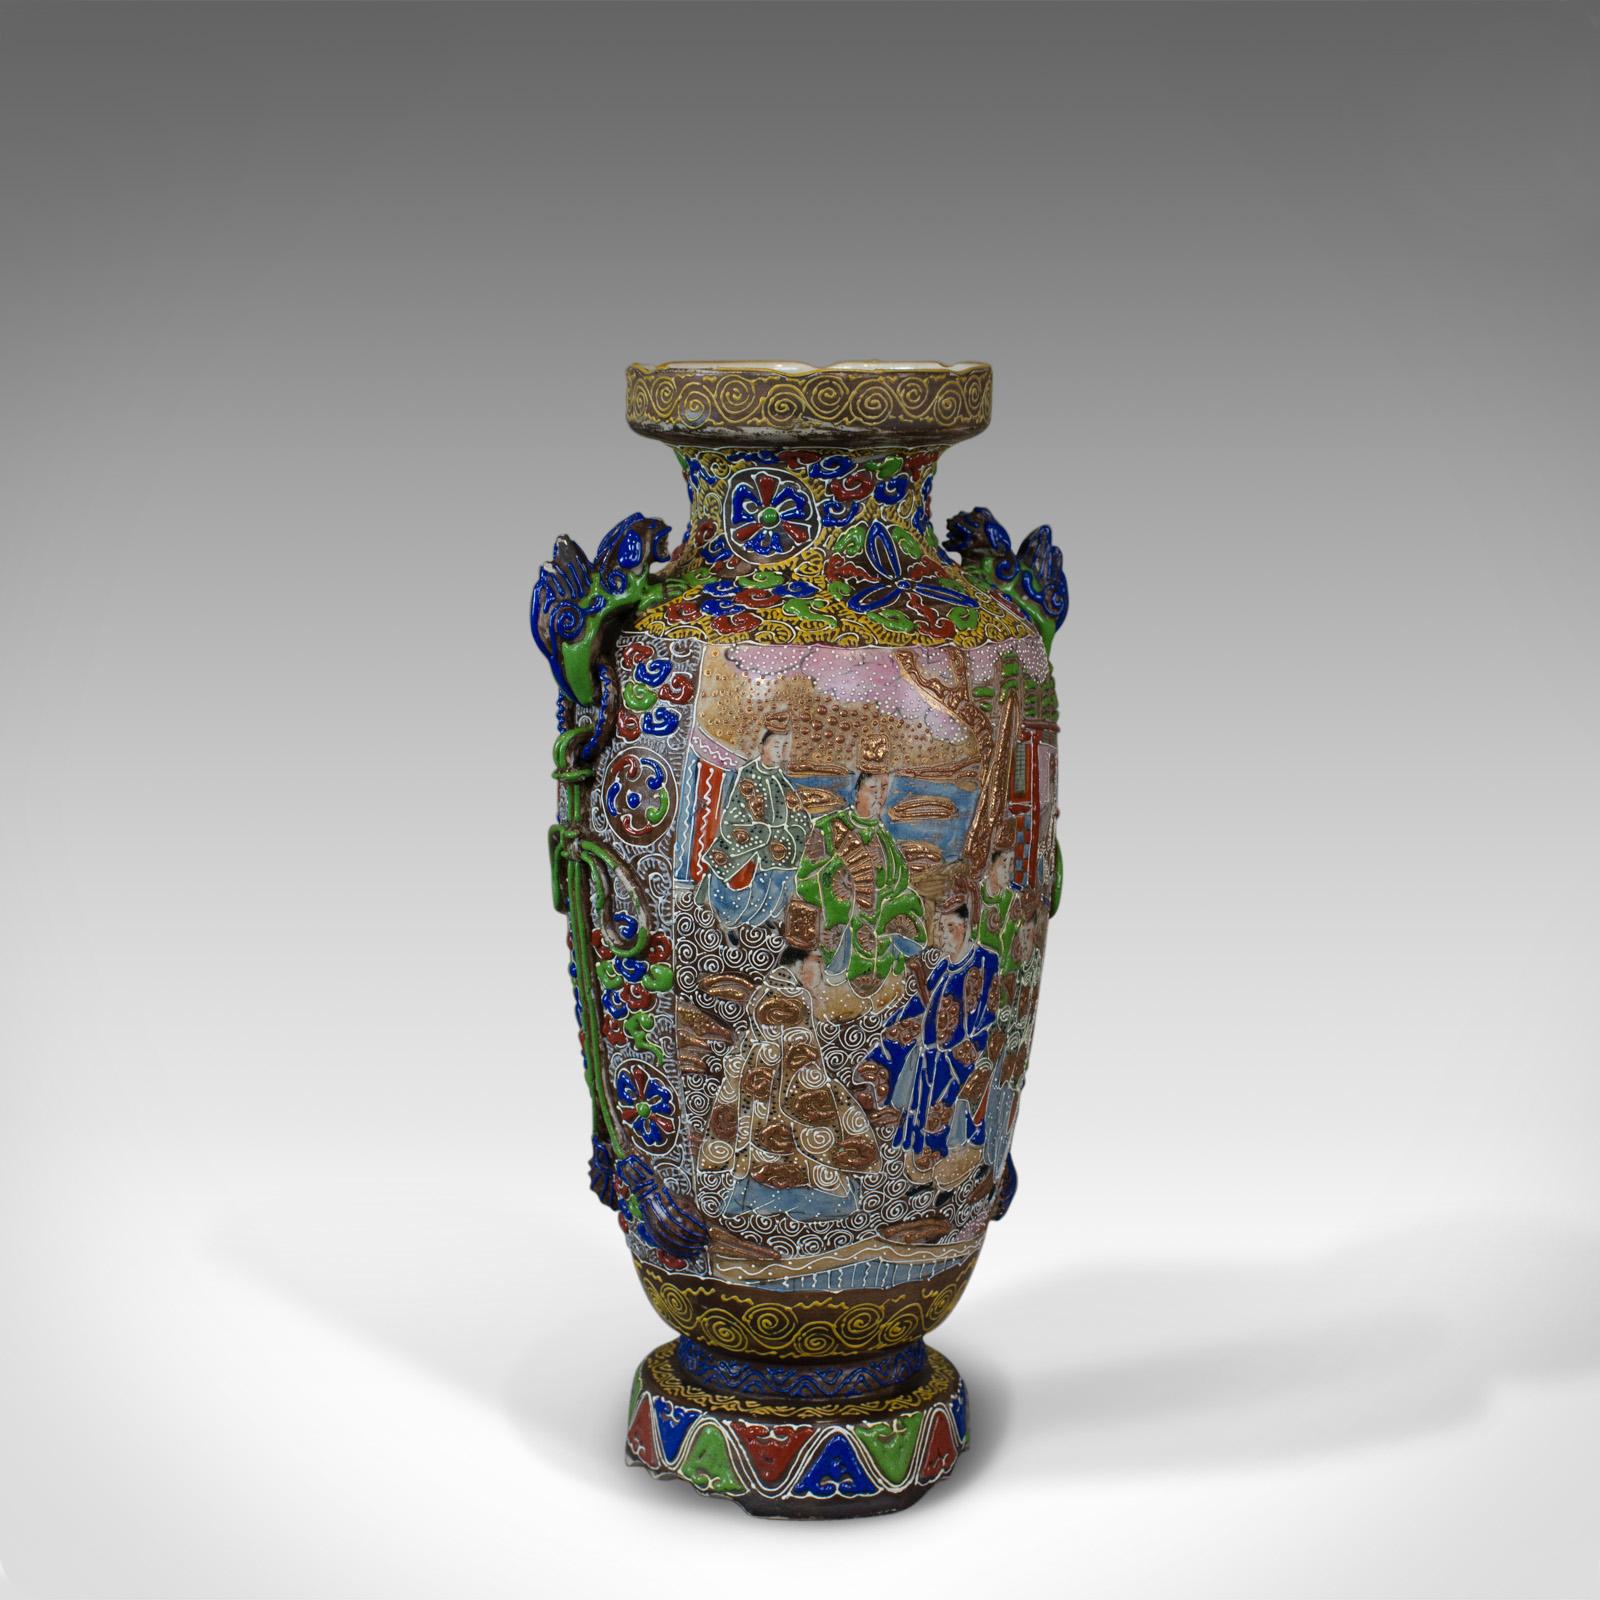 This is a vintage baluster vase. An oriental, highly decorative ceramic vessel dating to the mid-20th century.

Of Classic form and in good proportion
Of quality craftsmanship, free from damage
Maker's mark to the base which displays some